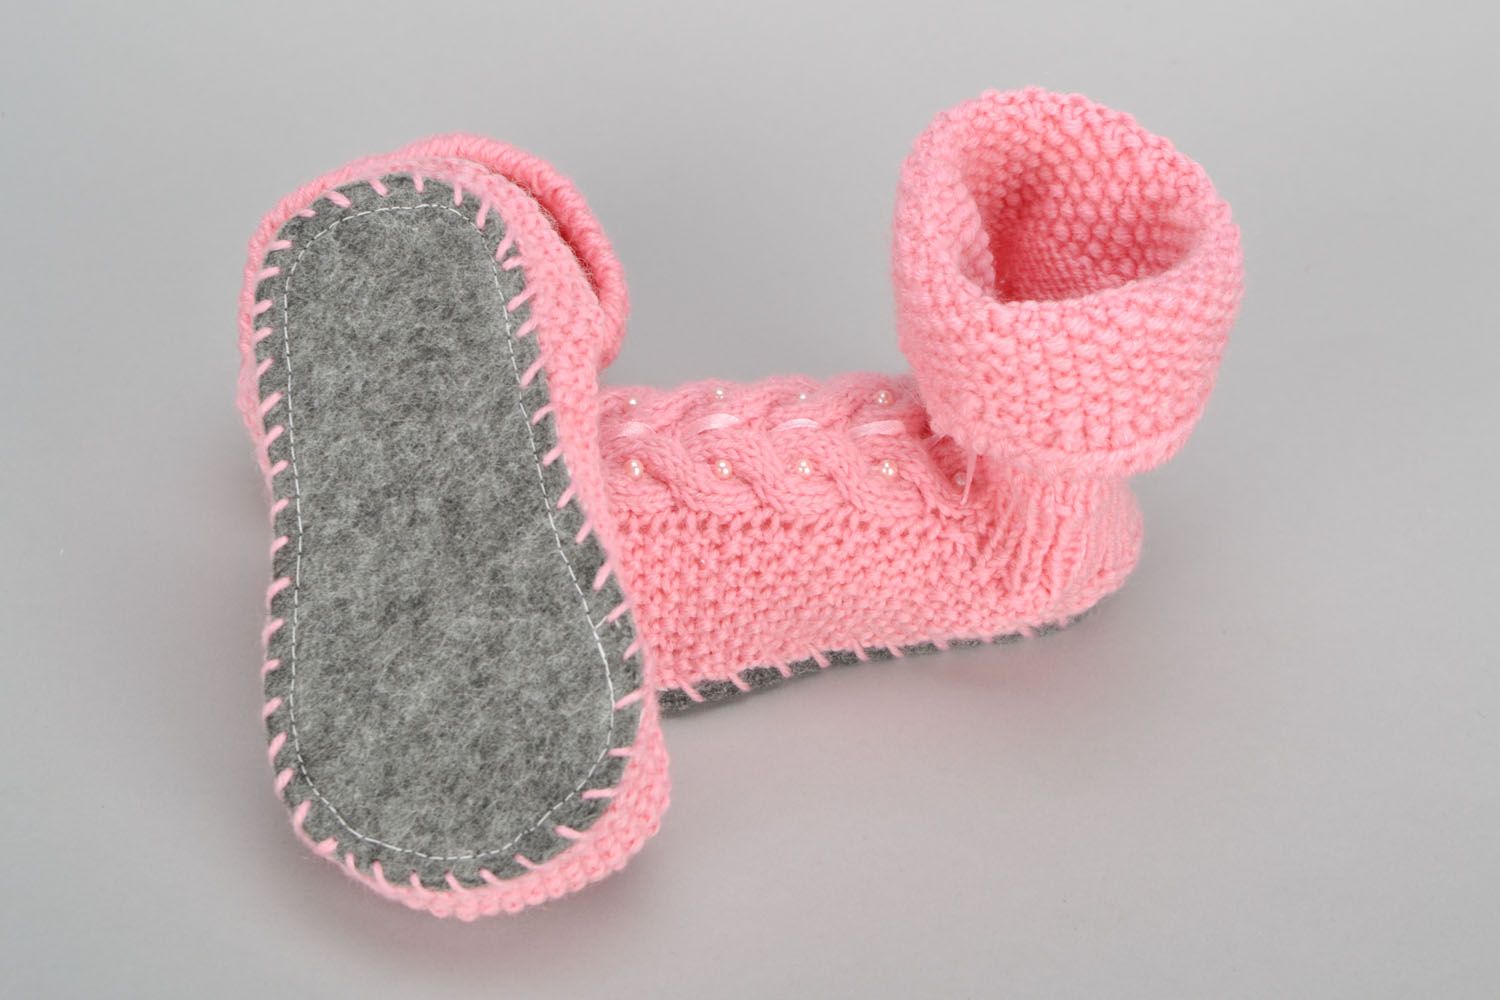 Crochet baby shoes photo 5